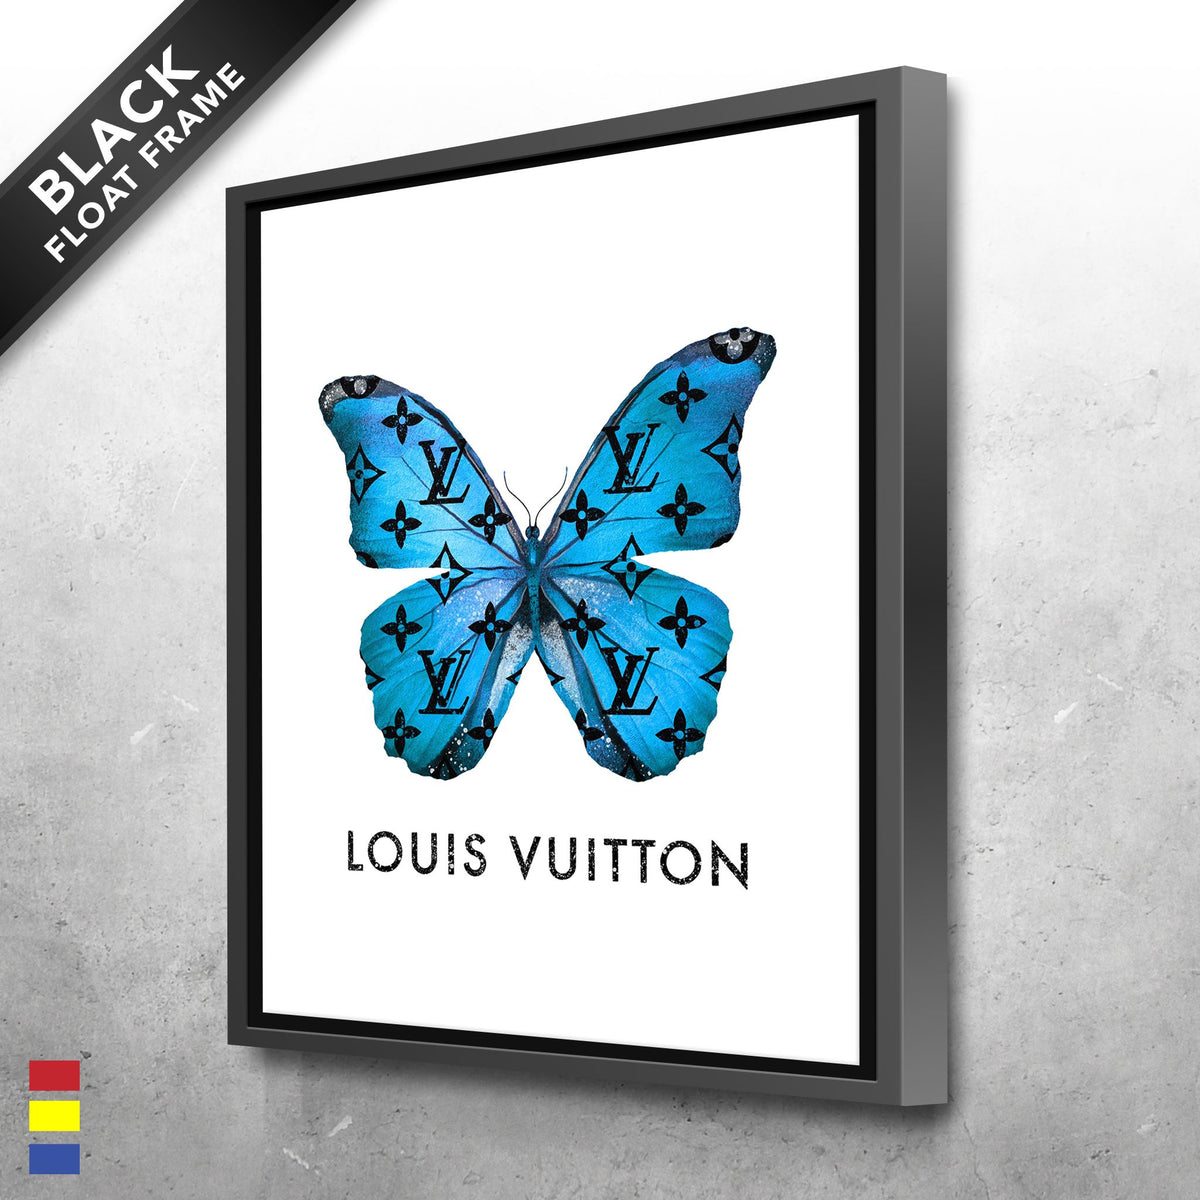 Louis Vuitton wall LV wall painted white aesthetic